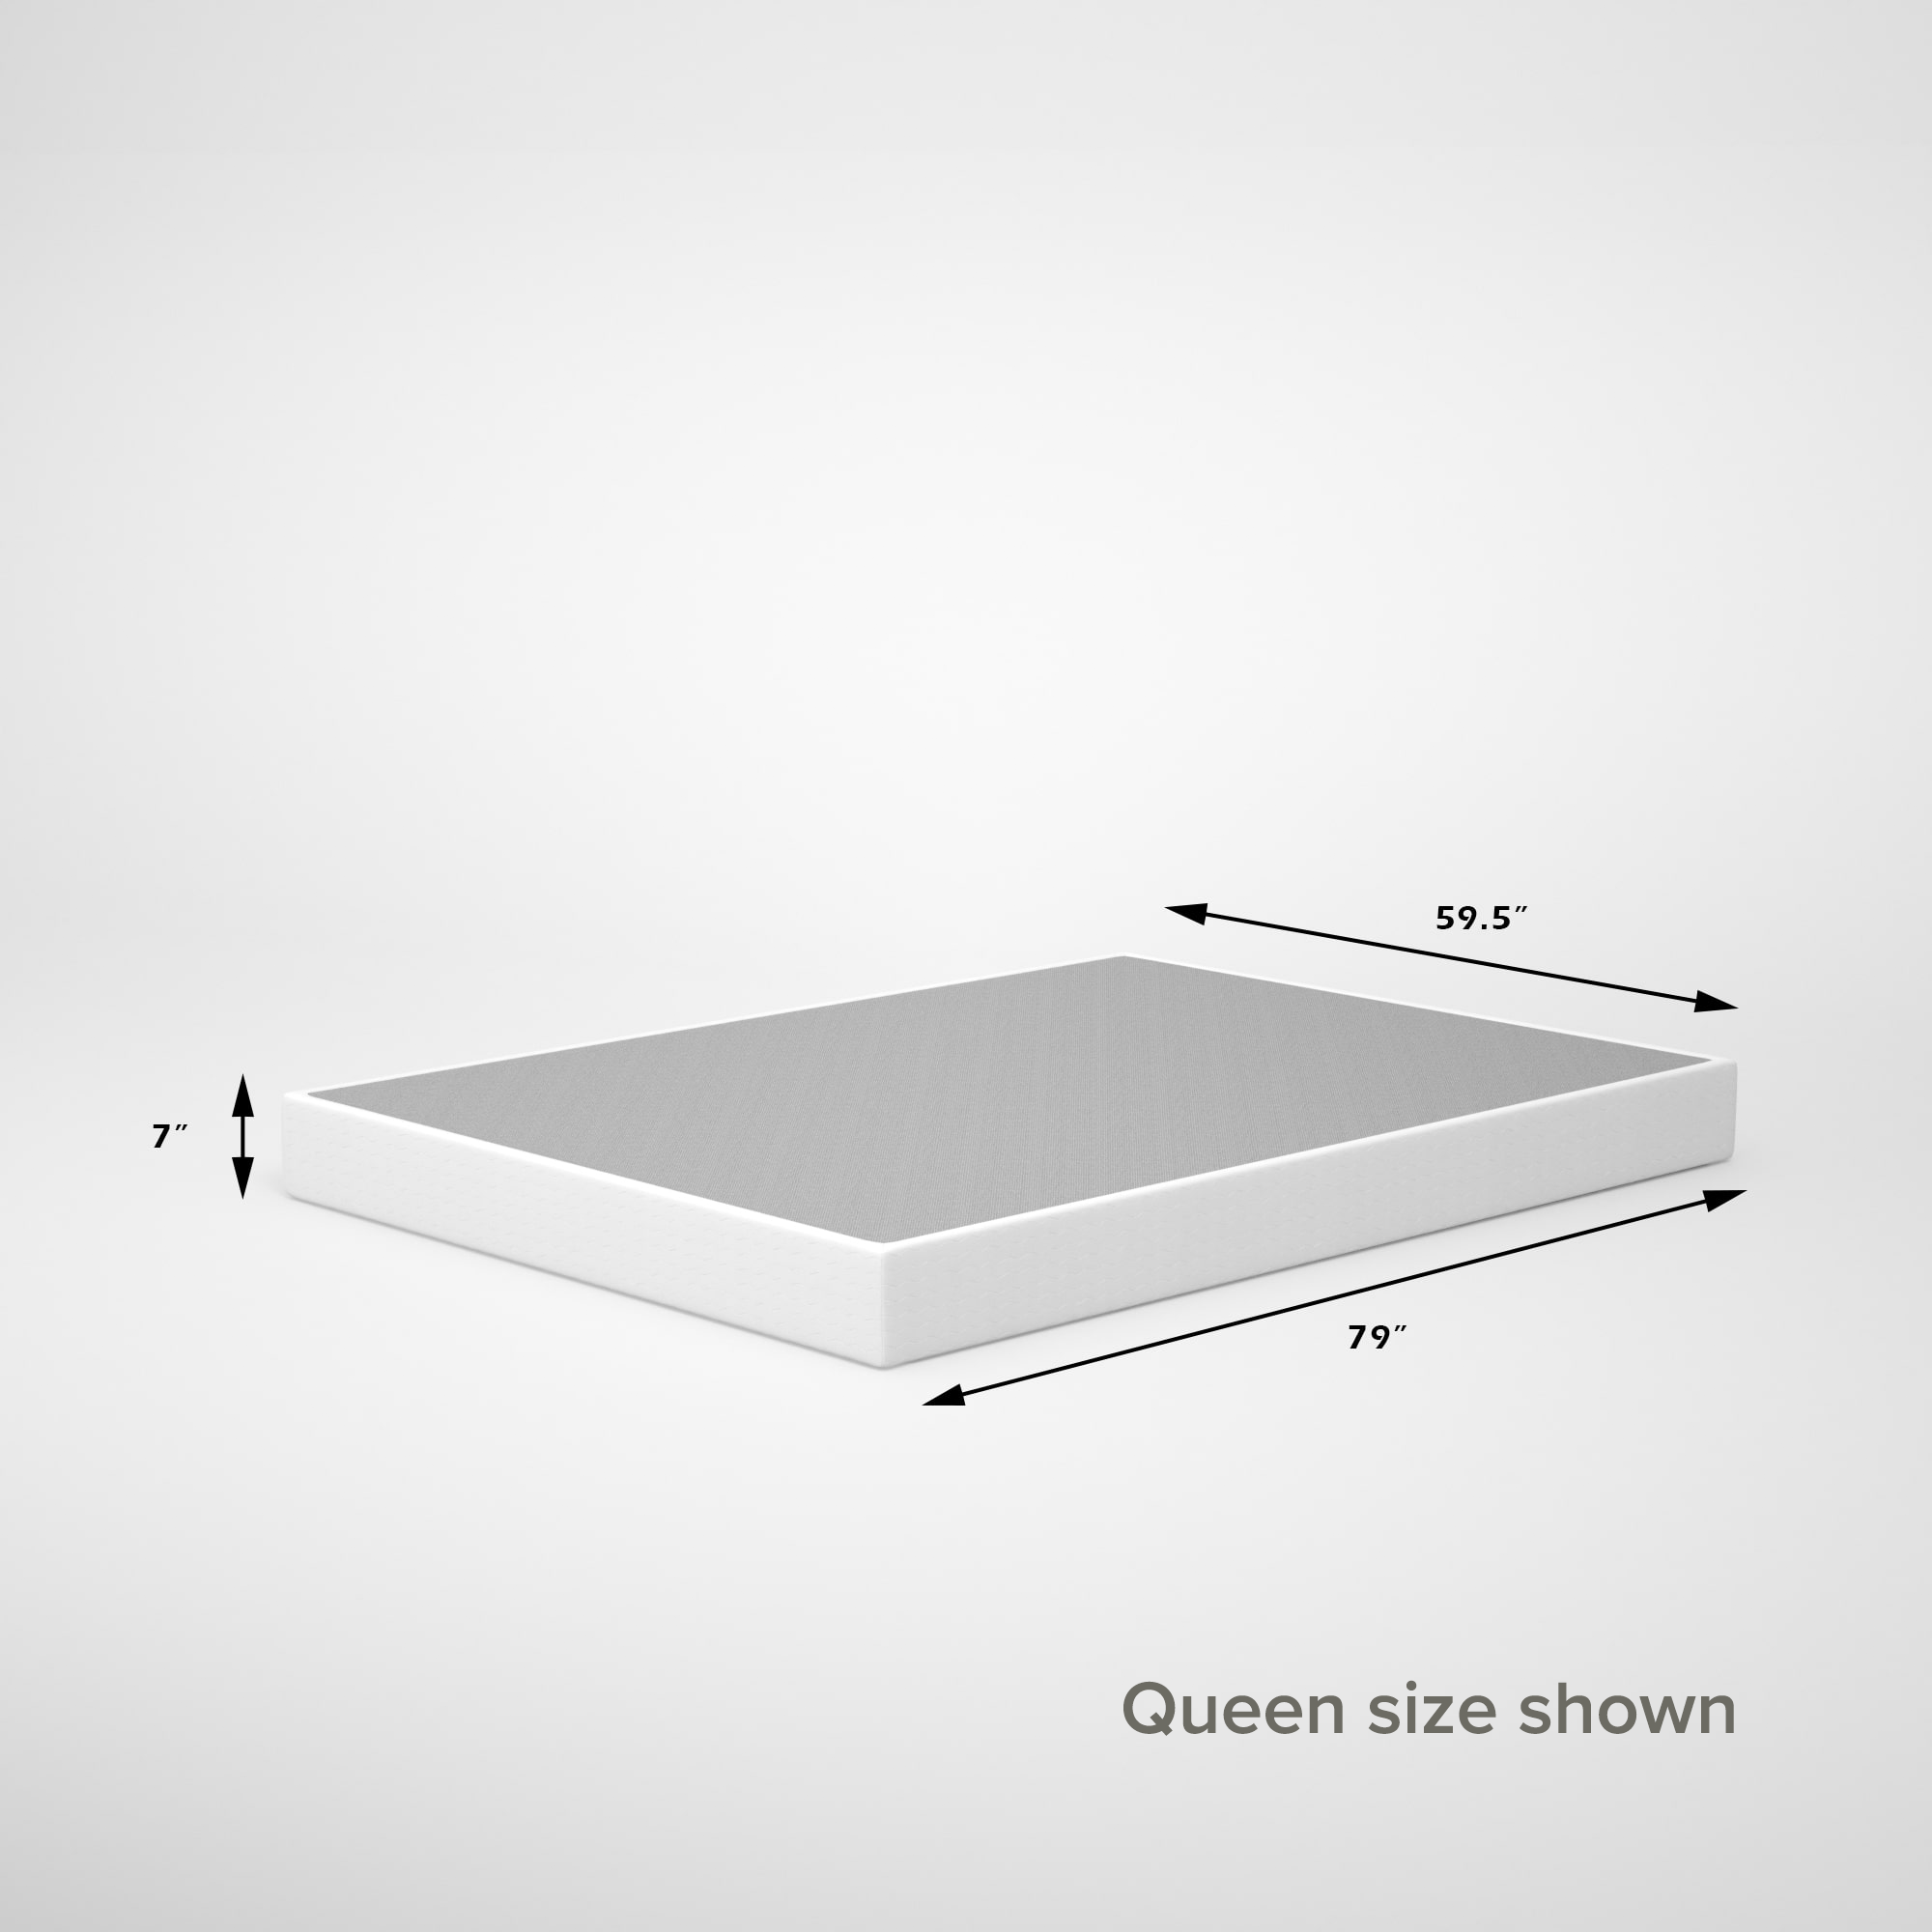 Smart Metal Box Spring 7 inch queen size dimensions shown